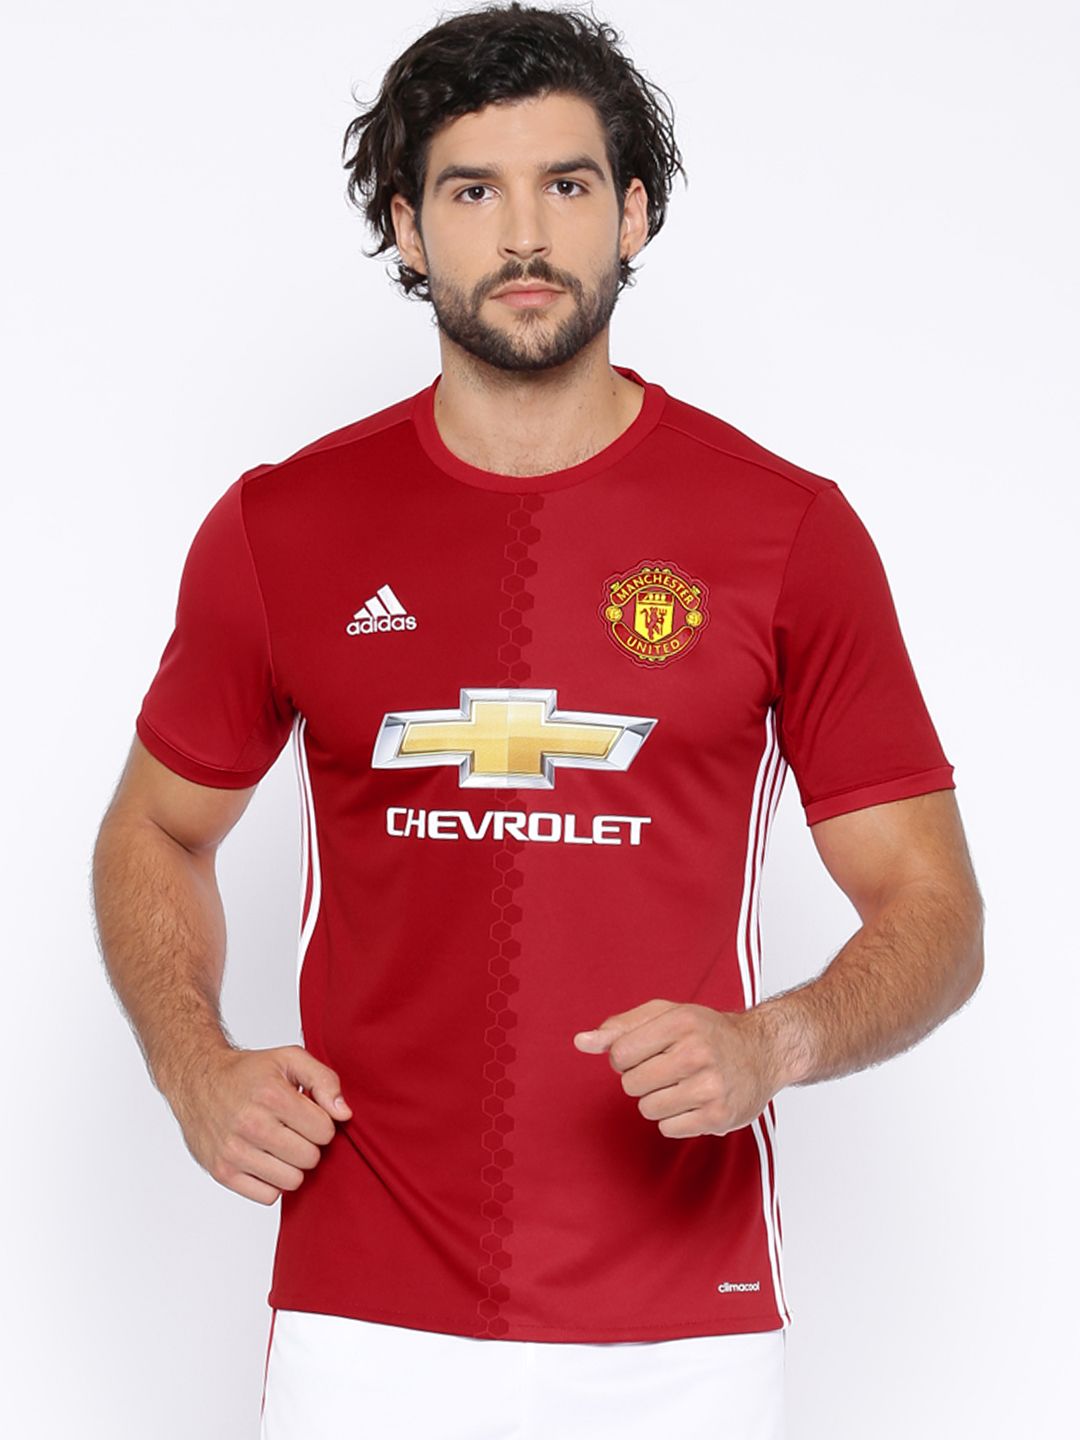 manchester united jersey price